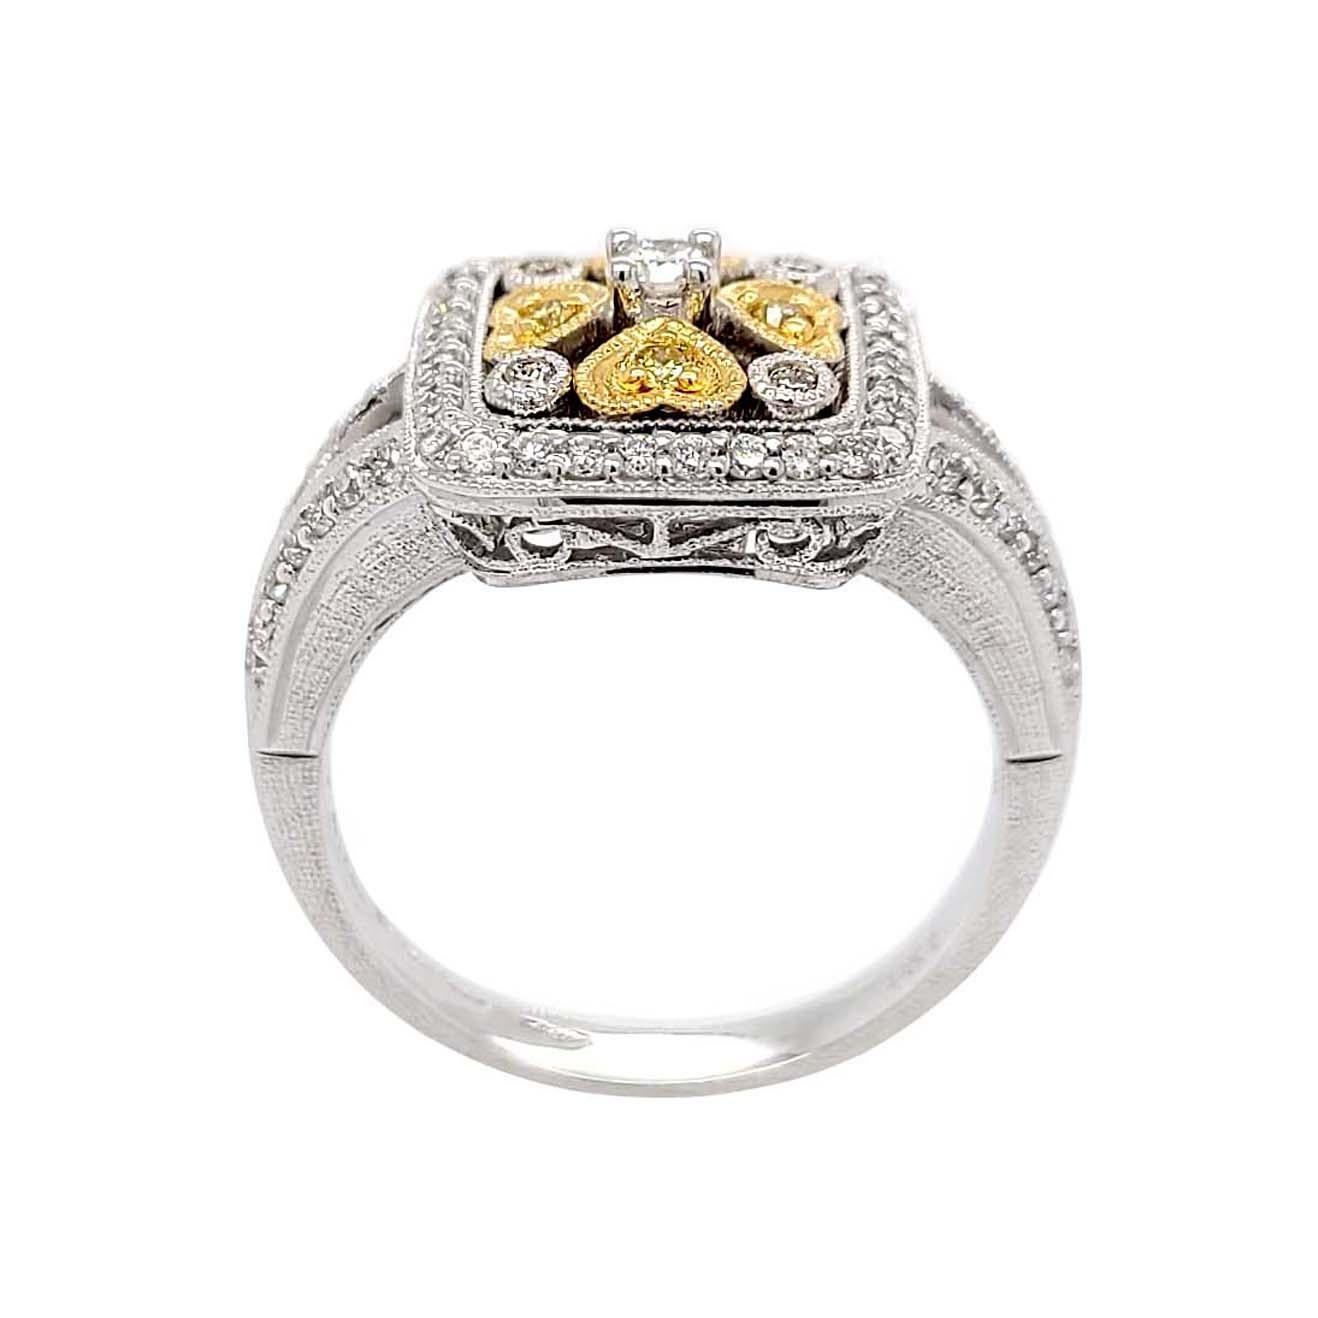 Produced by award winning Italian designer Stefano Vitolo. Stefano, creates custom artisanal one of a kind jewelry with excellent gemstones in a truly old word Italian craftsmanship.
This handcrafted ring has 0.52 total carat weight of G color  VS